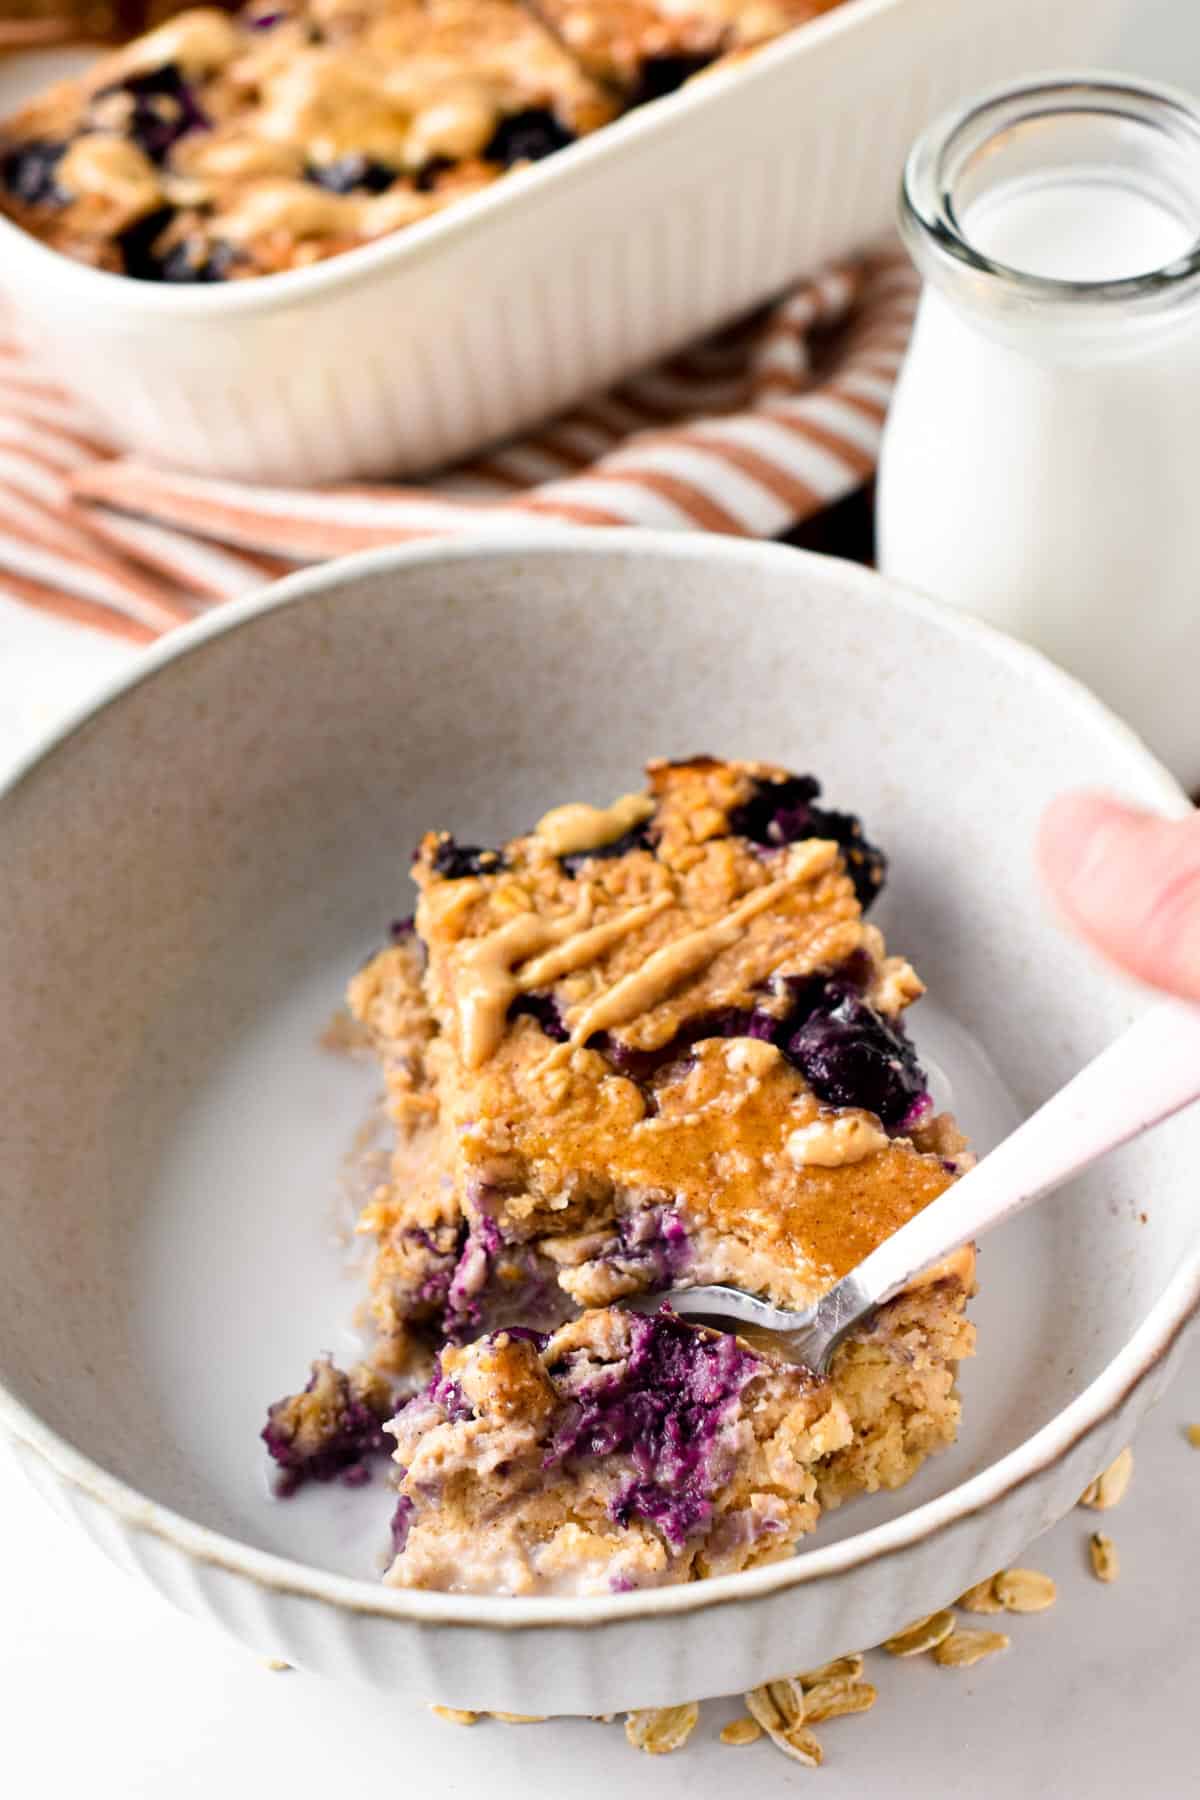 This Protein Baked Oatmeal is the most easy, healthy high-protein breakfast to meal prep a week of tasty creamy vanilla oatmeal. Plus, with only 270 kcal per serve, this breakfast contains 16 grams of proteins and 5 g of fiber to keep you full for hours.